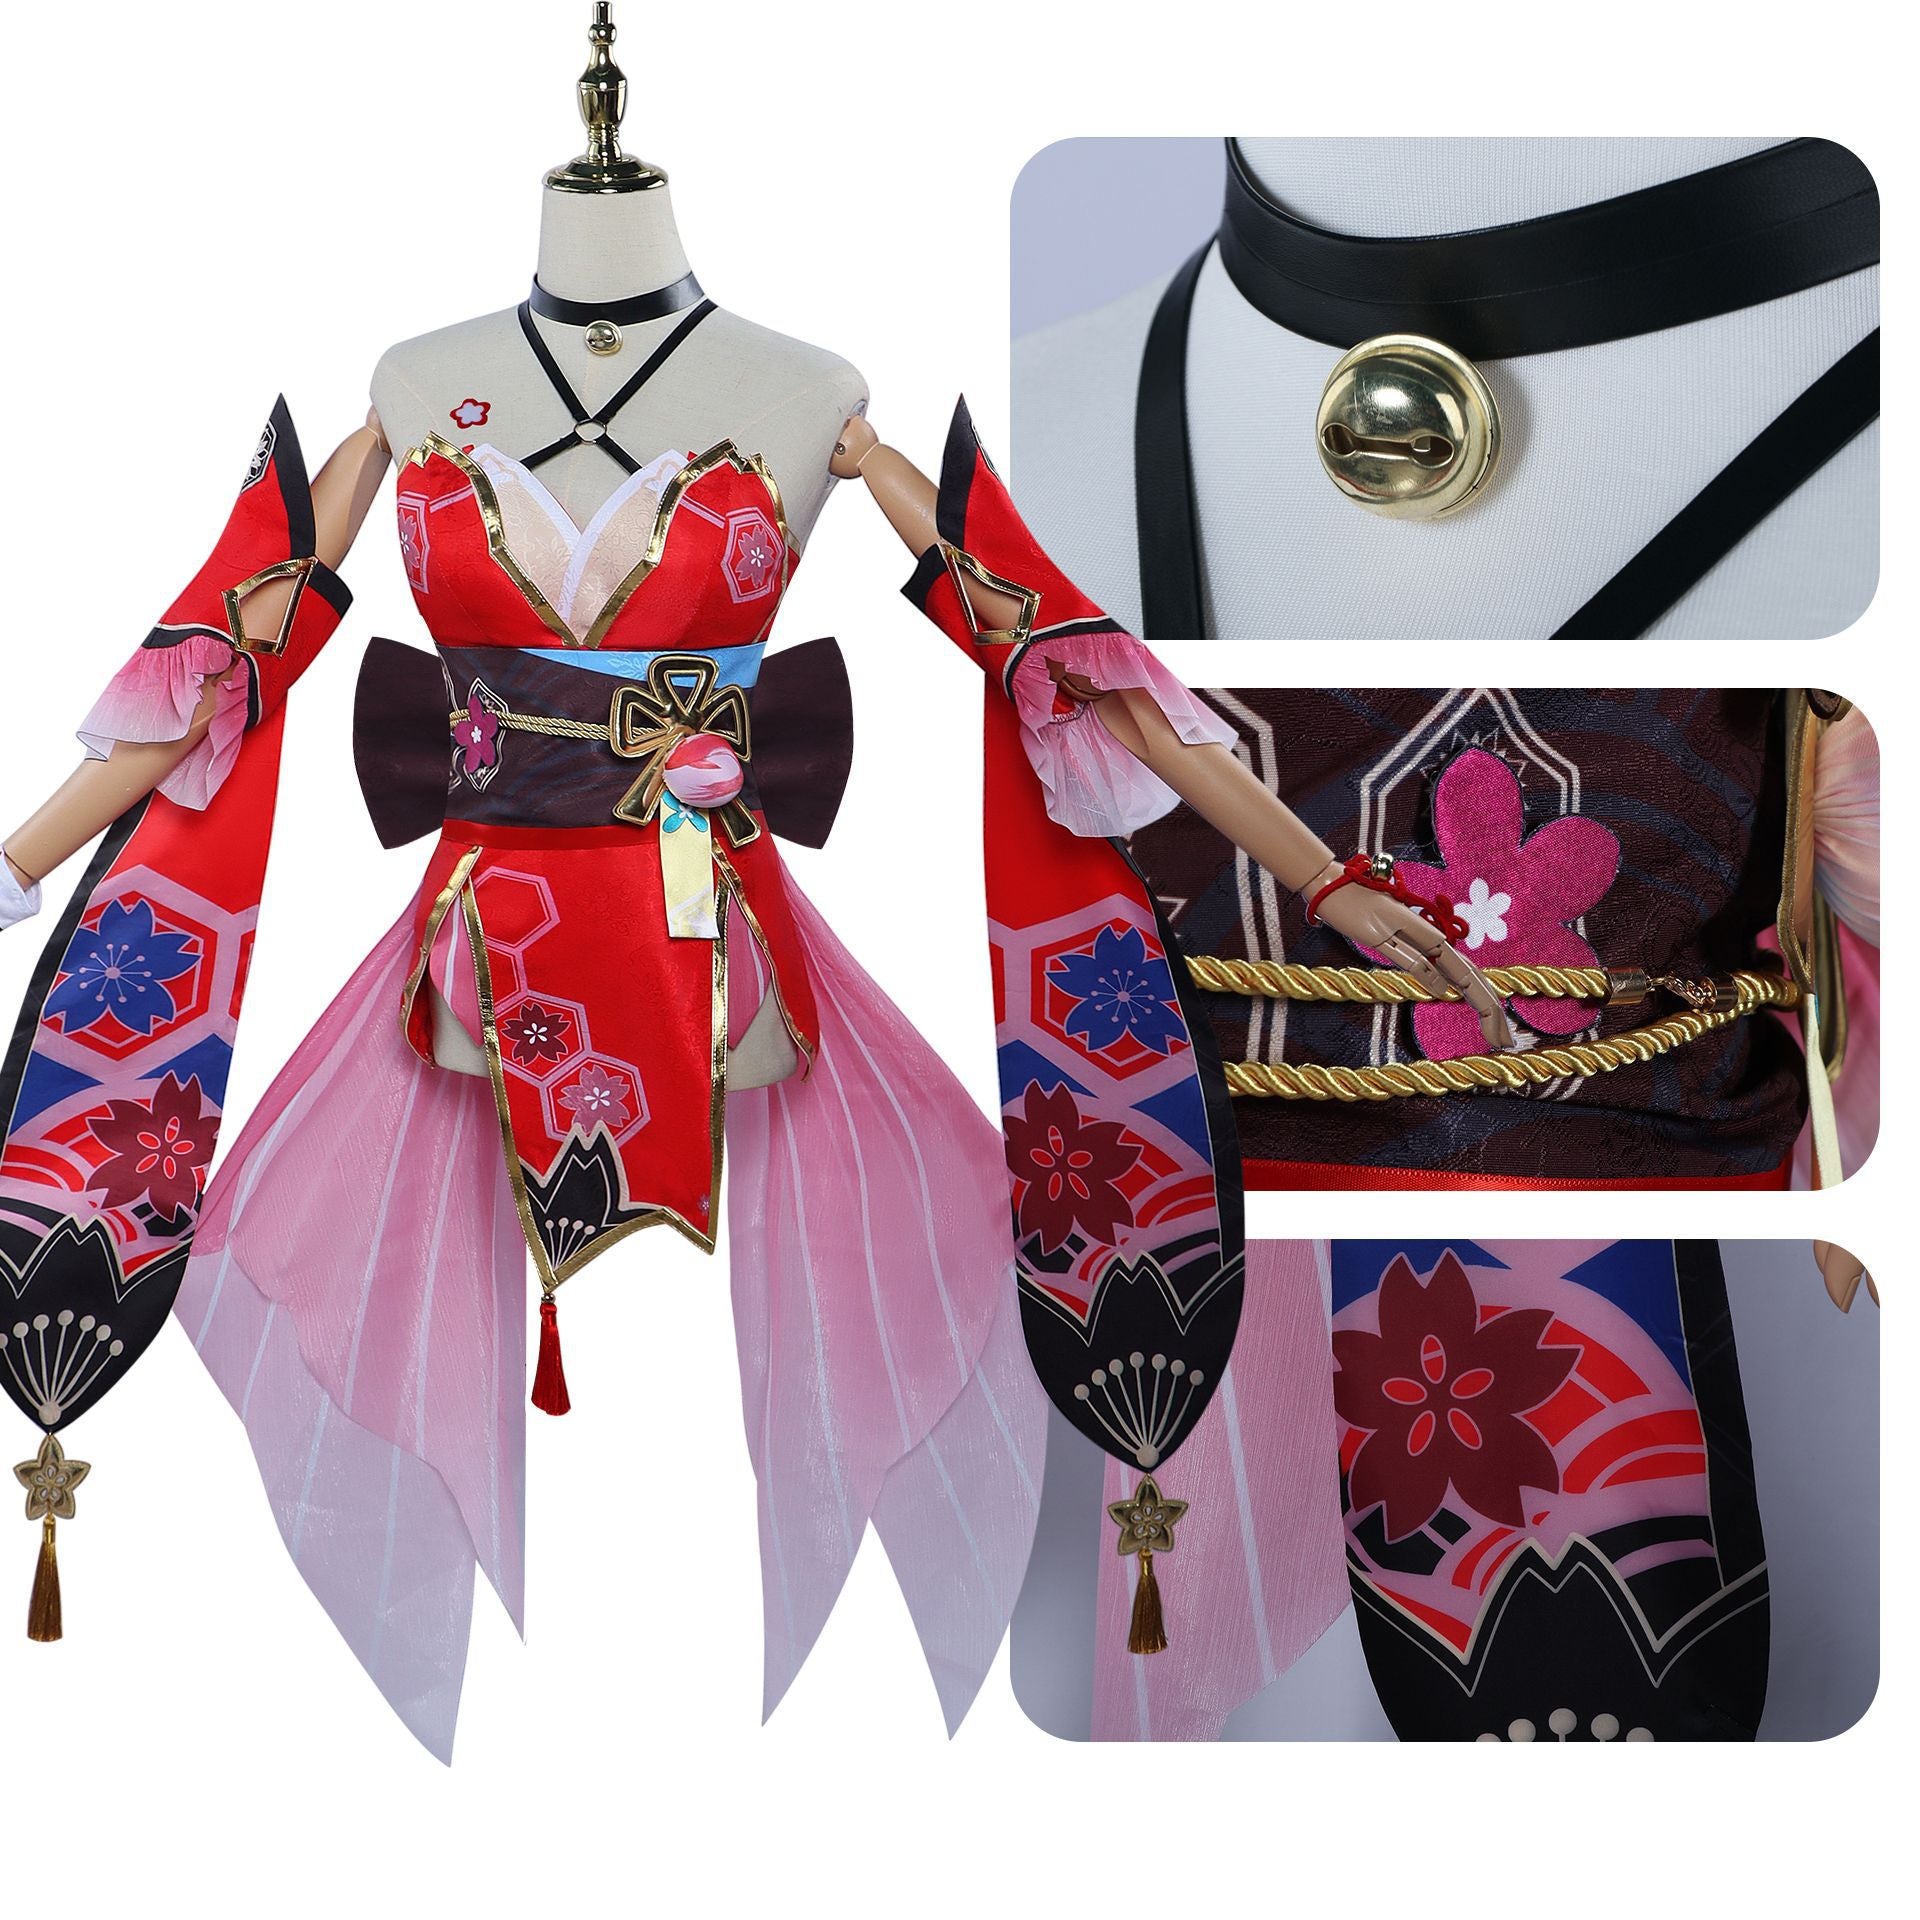 Rulercosplay Honkai Star Rail  Sparkle Uniform Suit Cosplay Costume With Accessories For Halloween Party